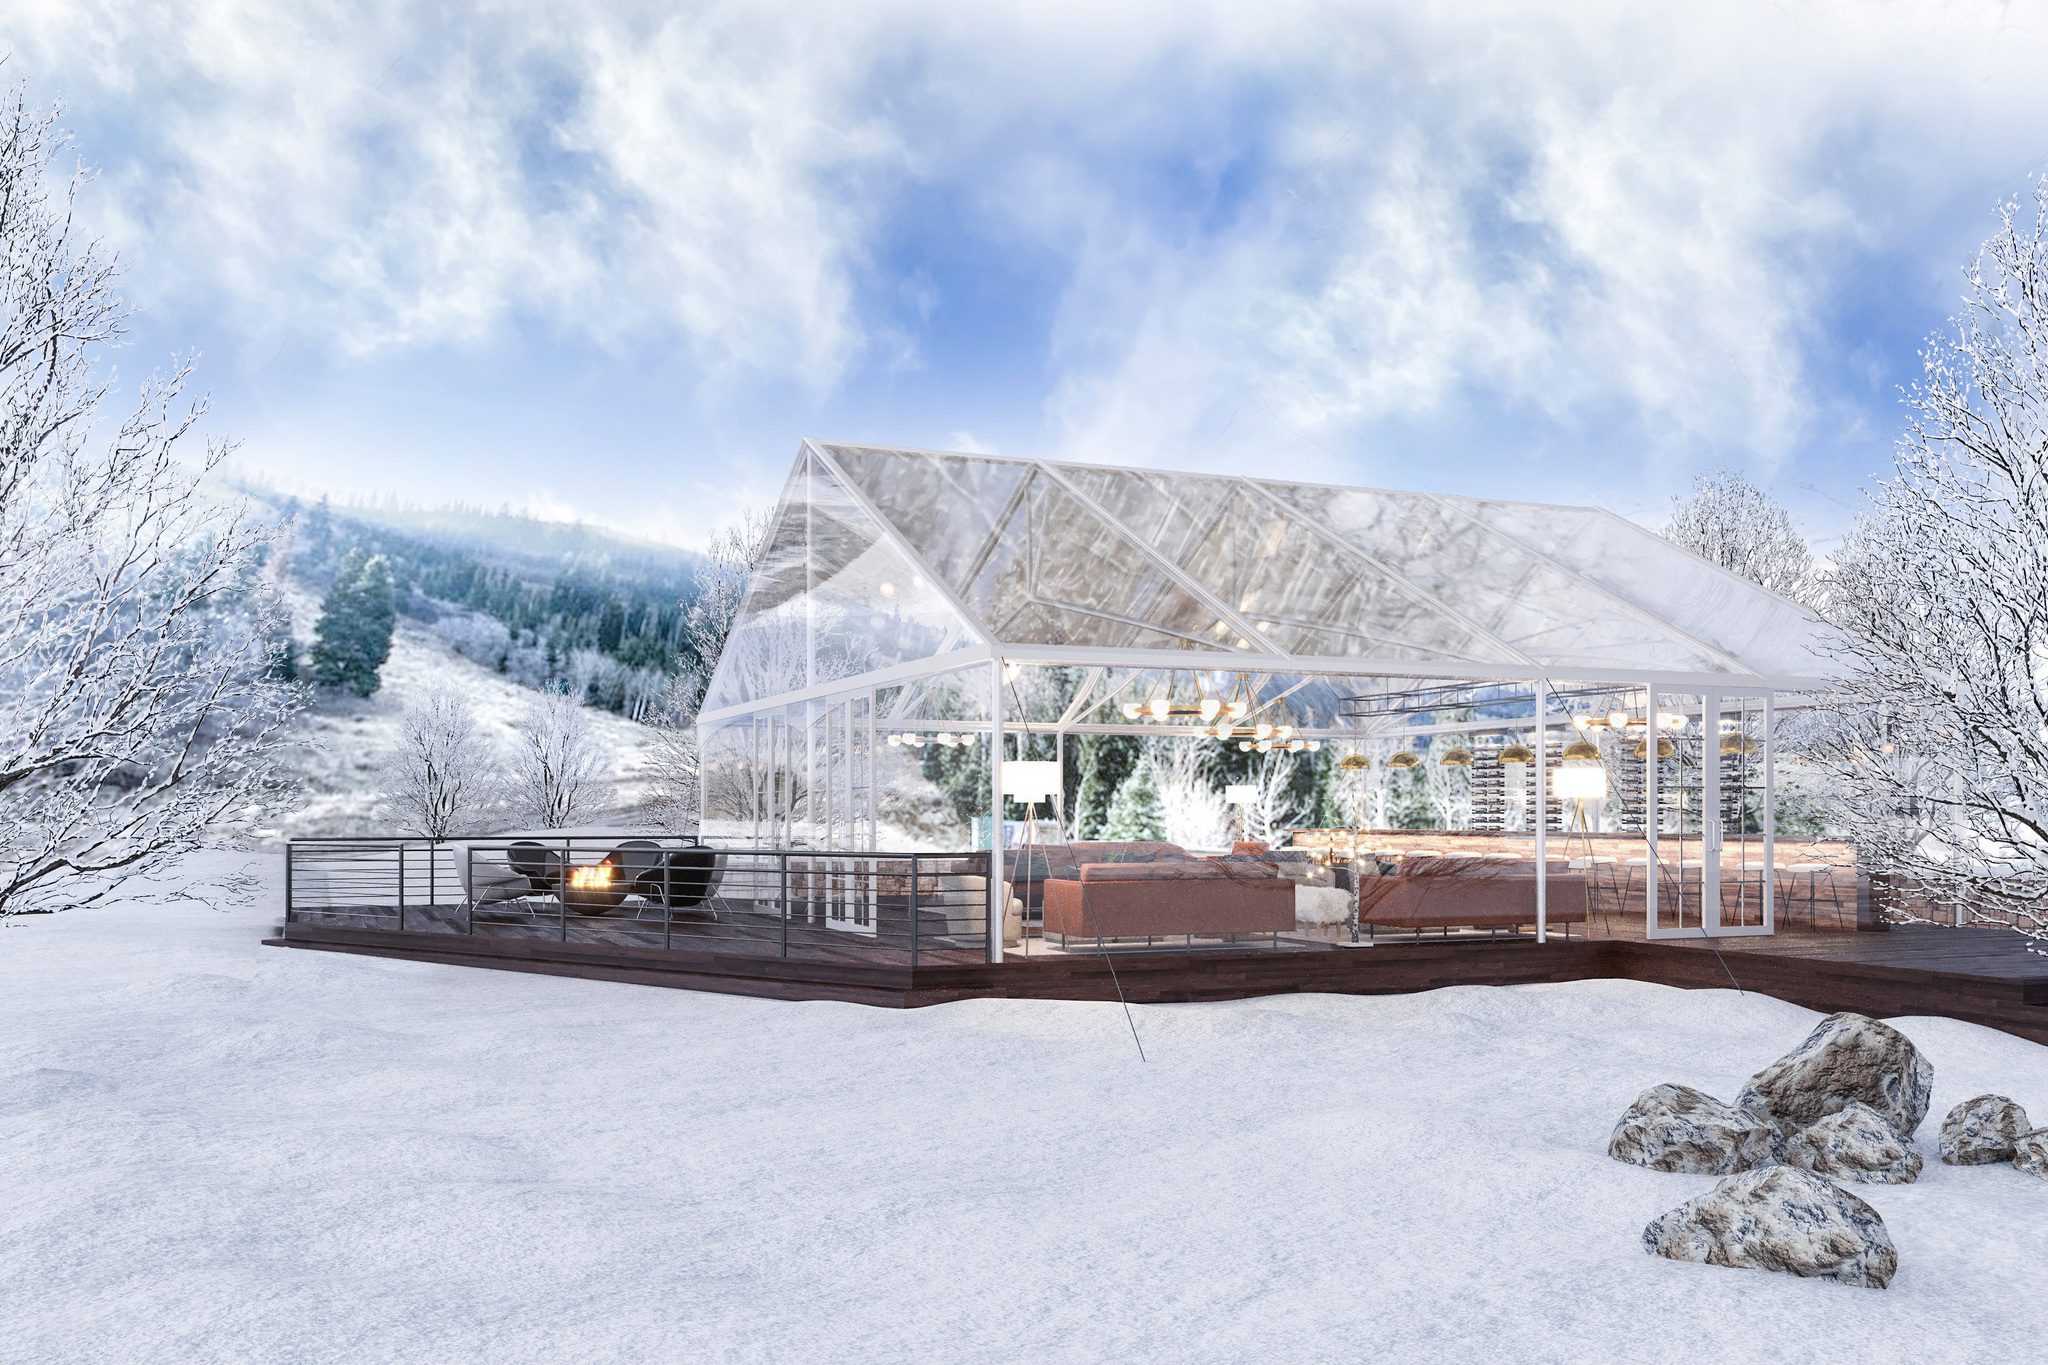 St. Regis Deer Valley opens new après and lunch lounge TownLift, Park